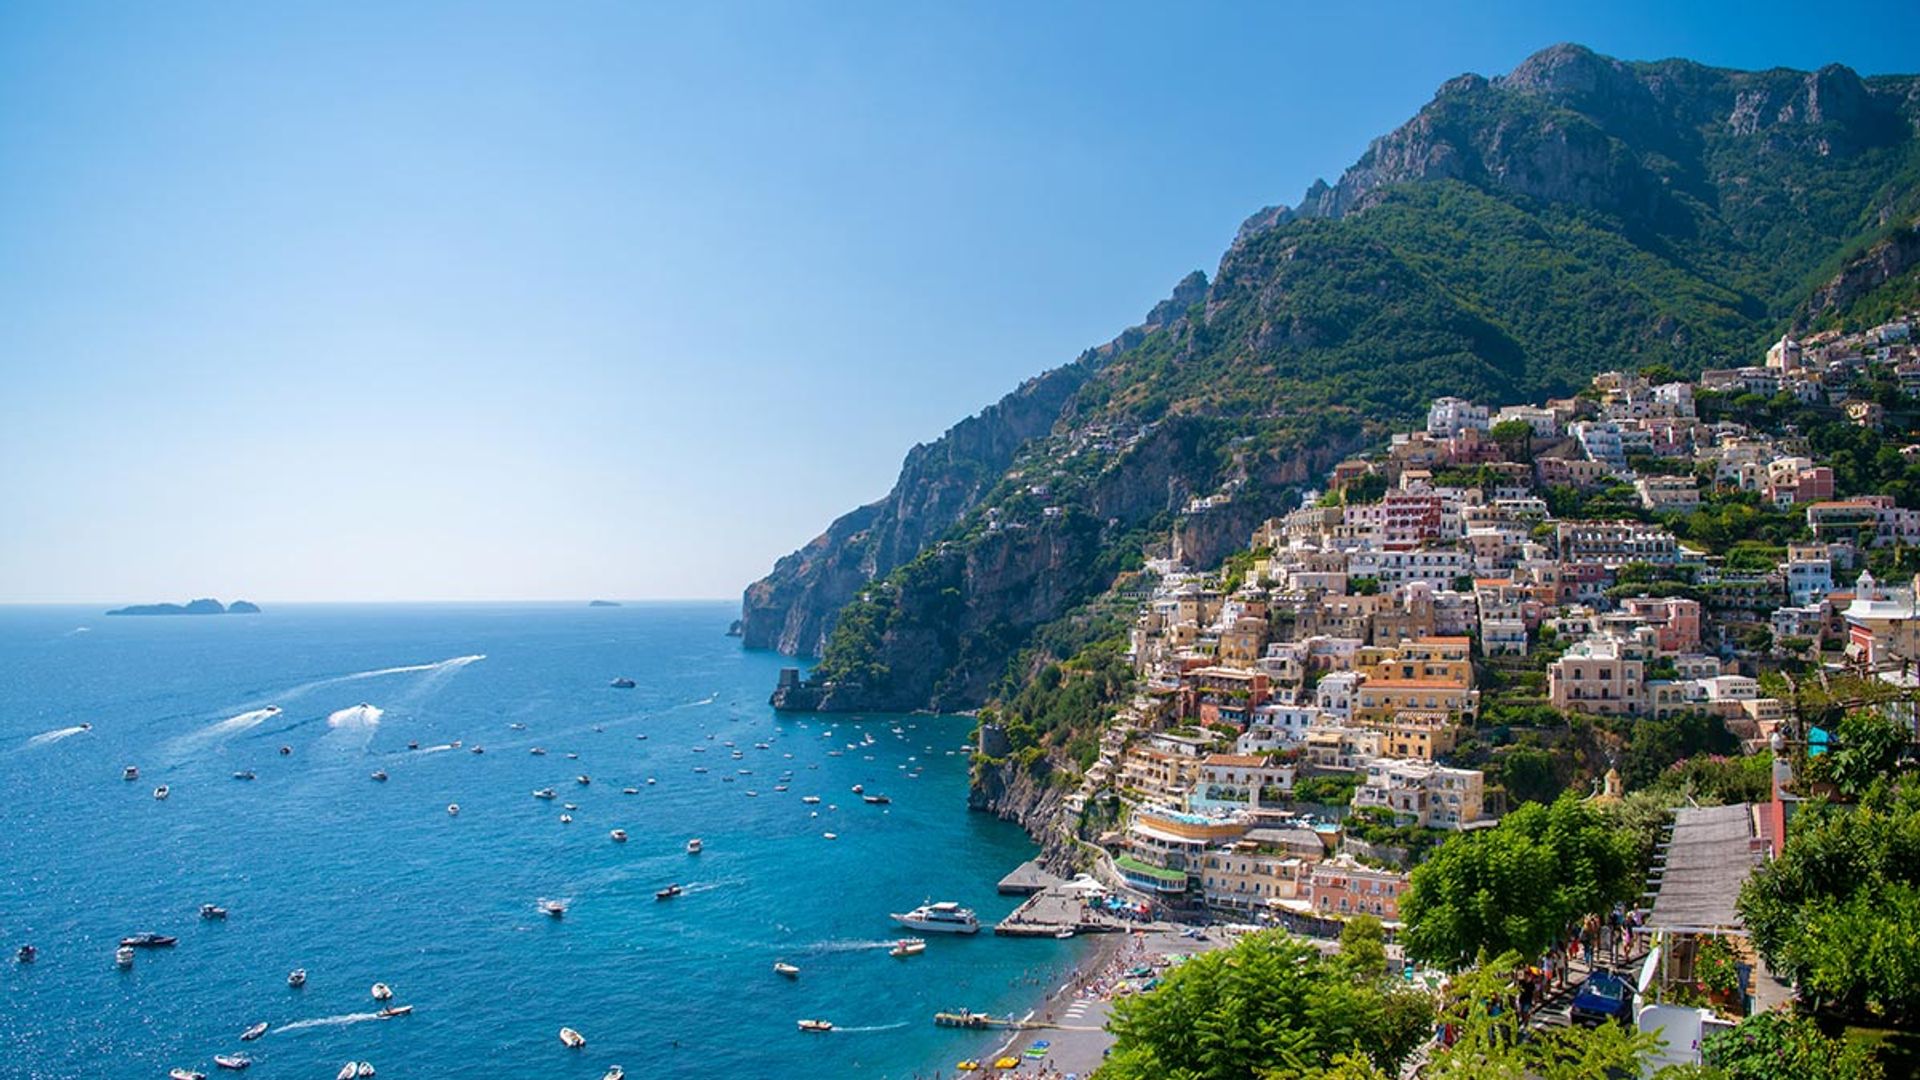 Positano hotel review: why you should stay at the luxurious Hotel Eden ...